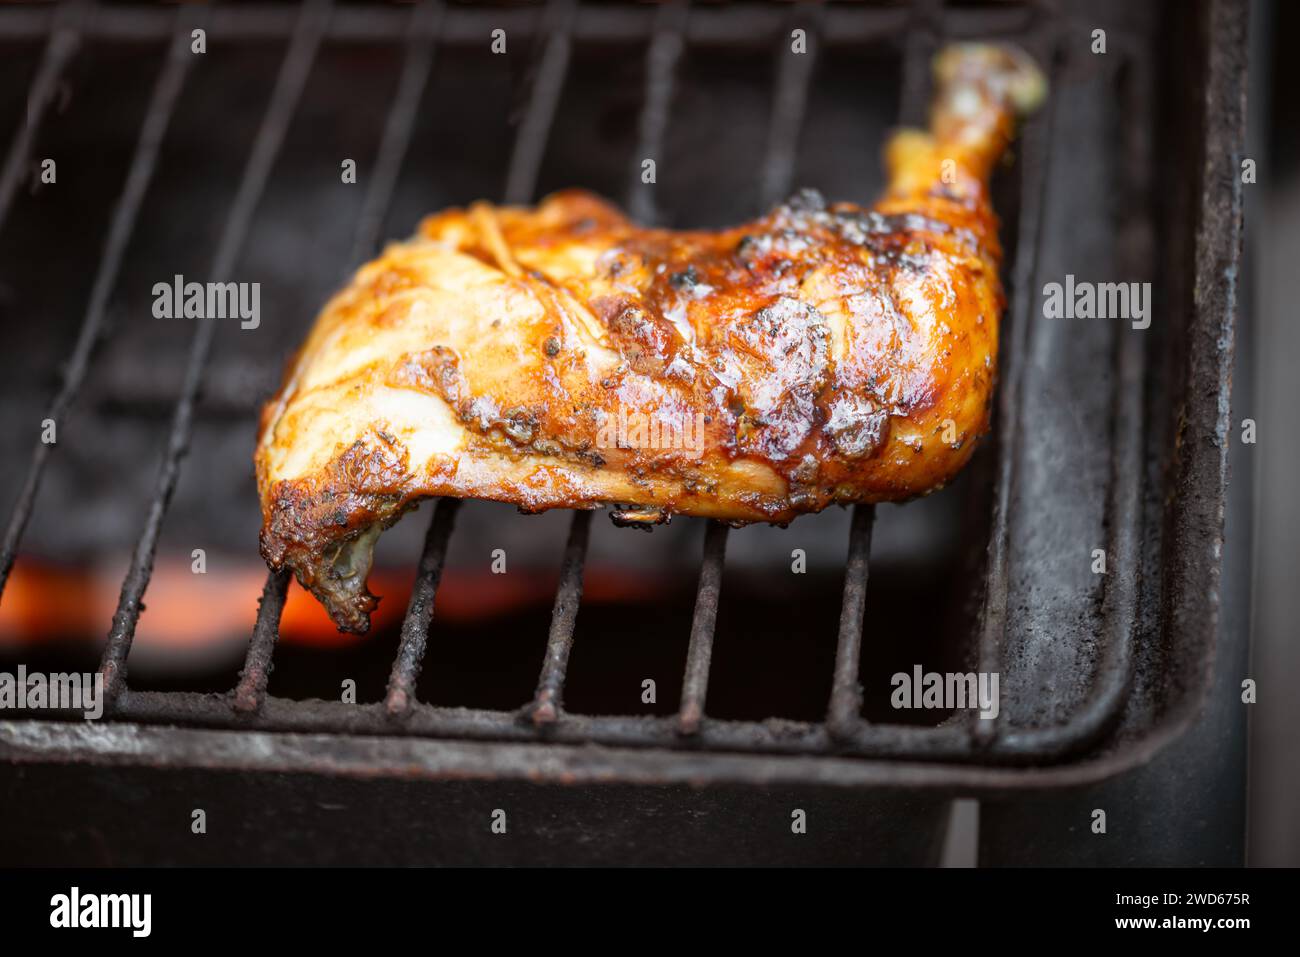 Barbeque pit chicken leg and thigh covered in BBQ sauce and spices and homemade spicy sauce flavourful Caribbean taste Stock Photo